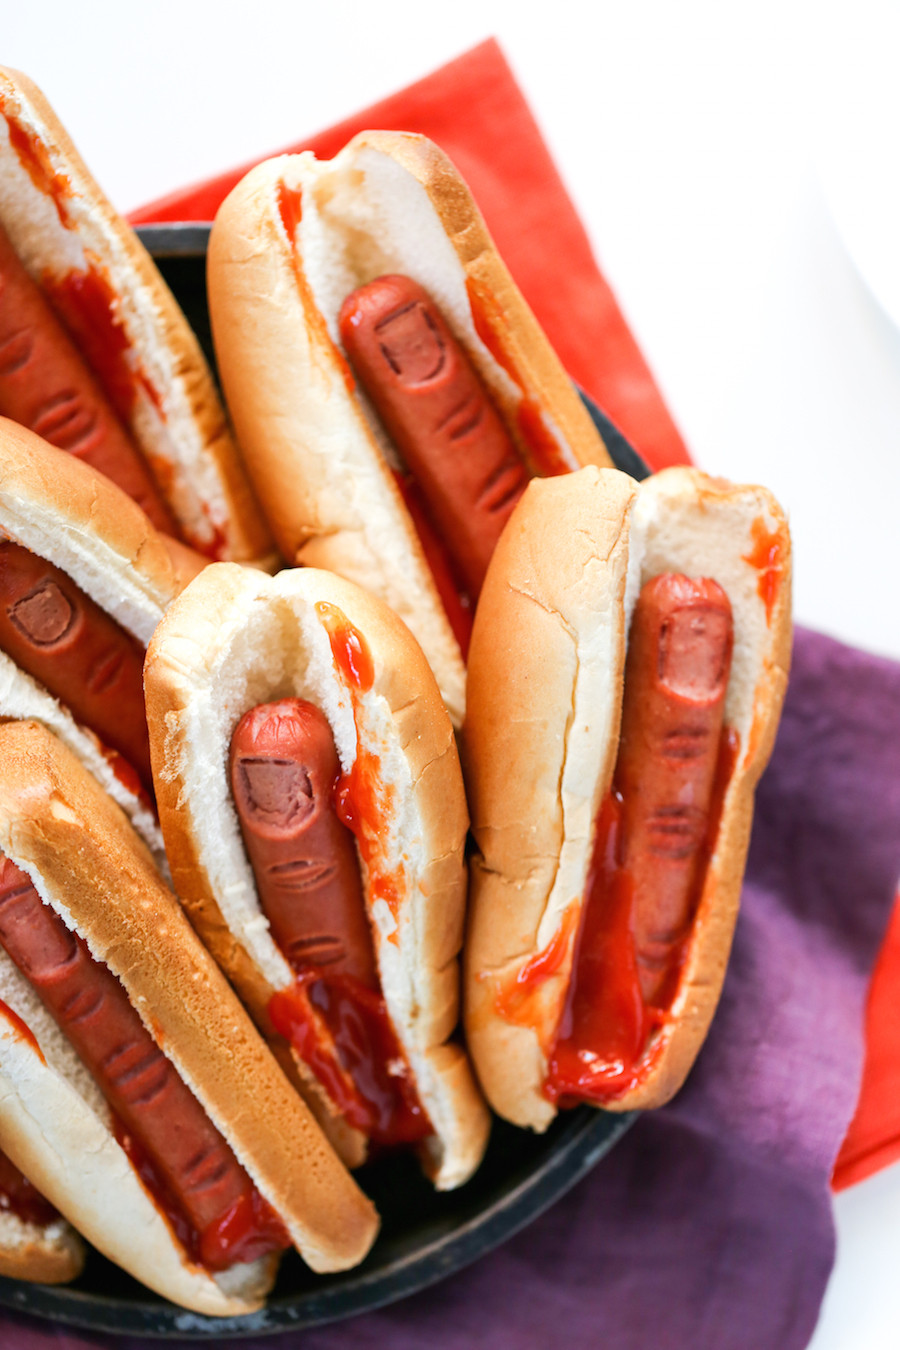 Halloween Party Finger Food Ideas
 Bloody Finger Hot Dogs for Halloween